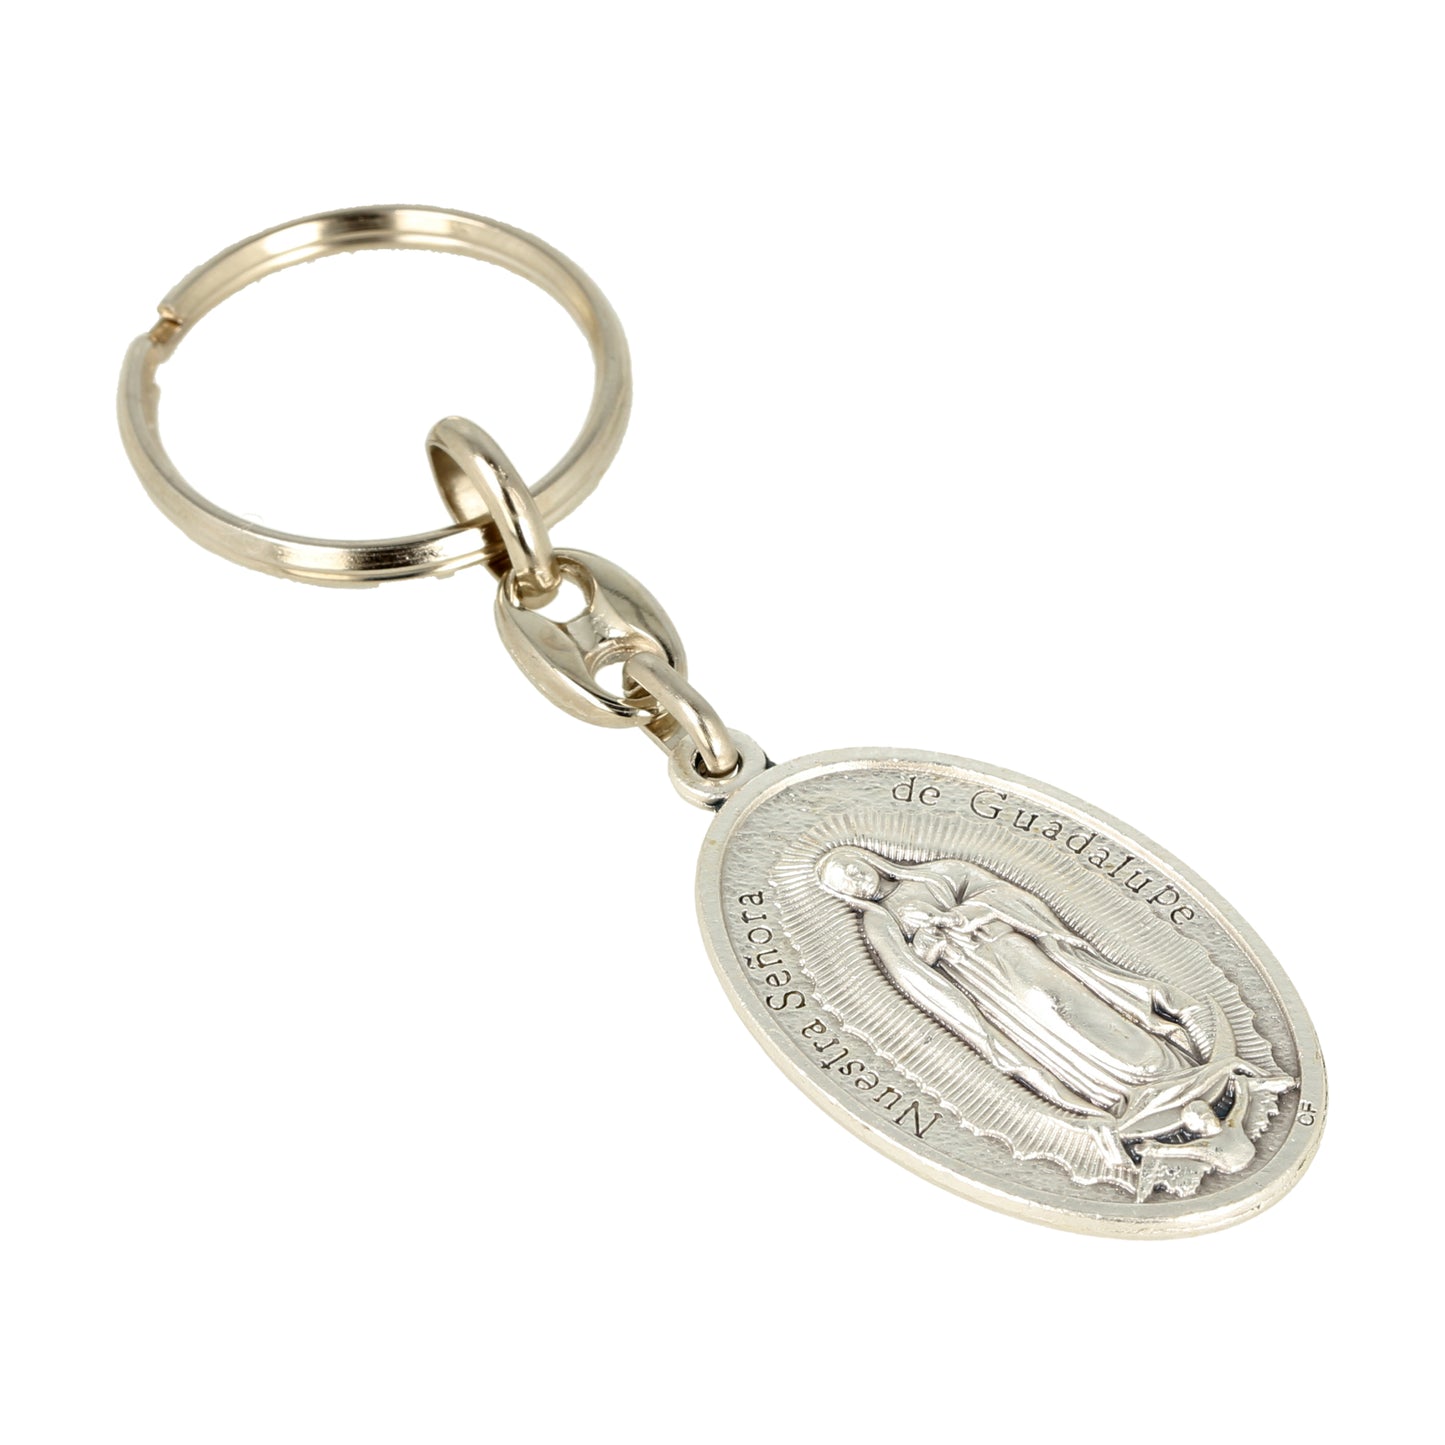 Keychain Virgin Guadalupe San Cristobal Oval Grd. Souvenirs from Italy